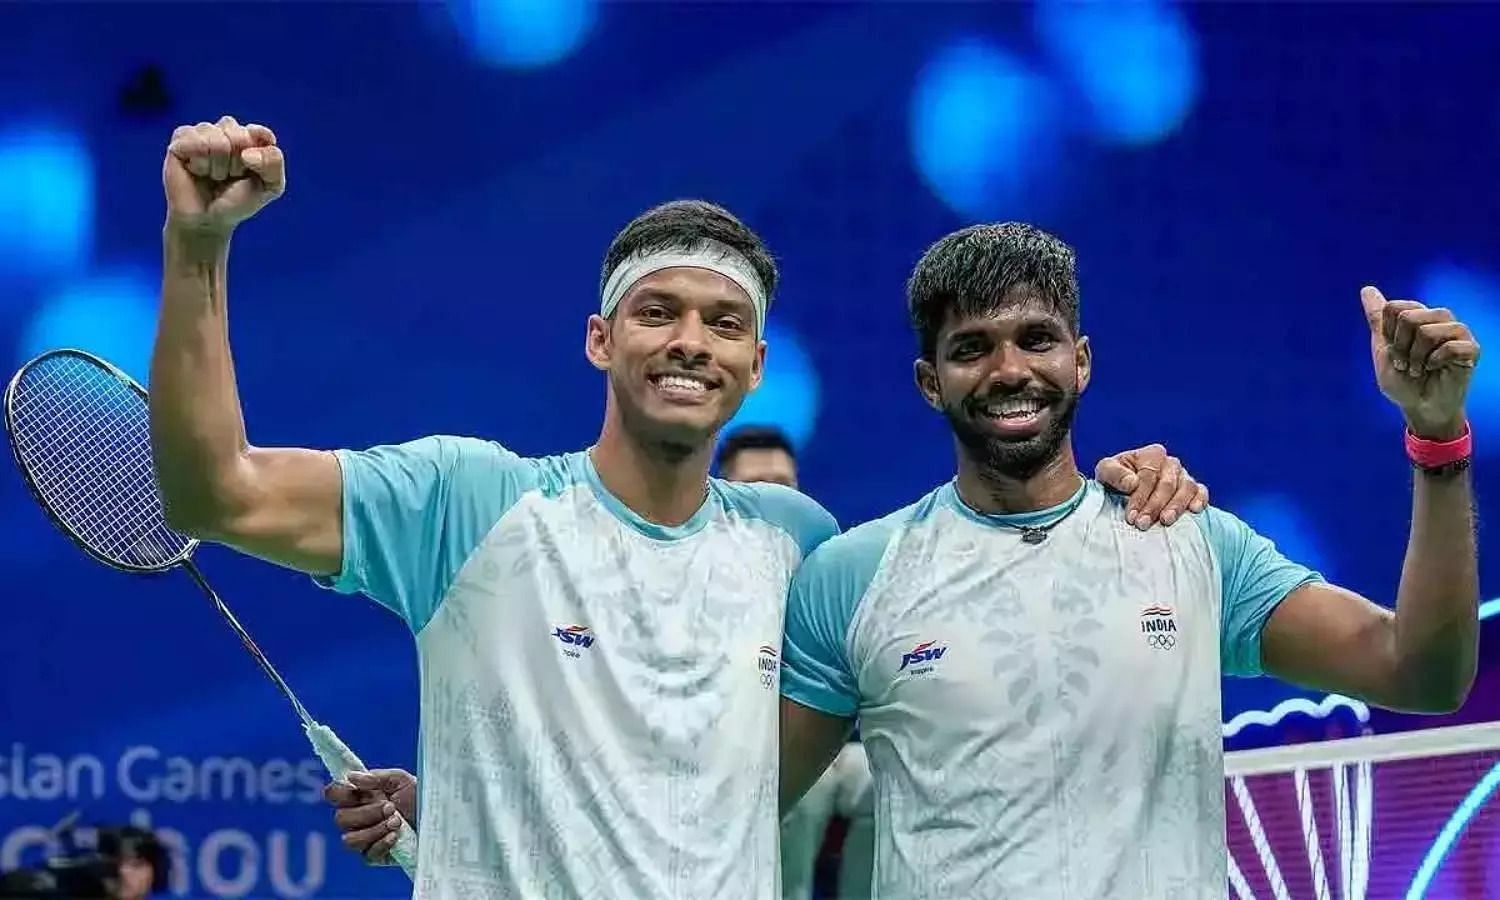 Chances for a fourth consecutive badminton podium finish for India at the Paris Olympics look bright 